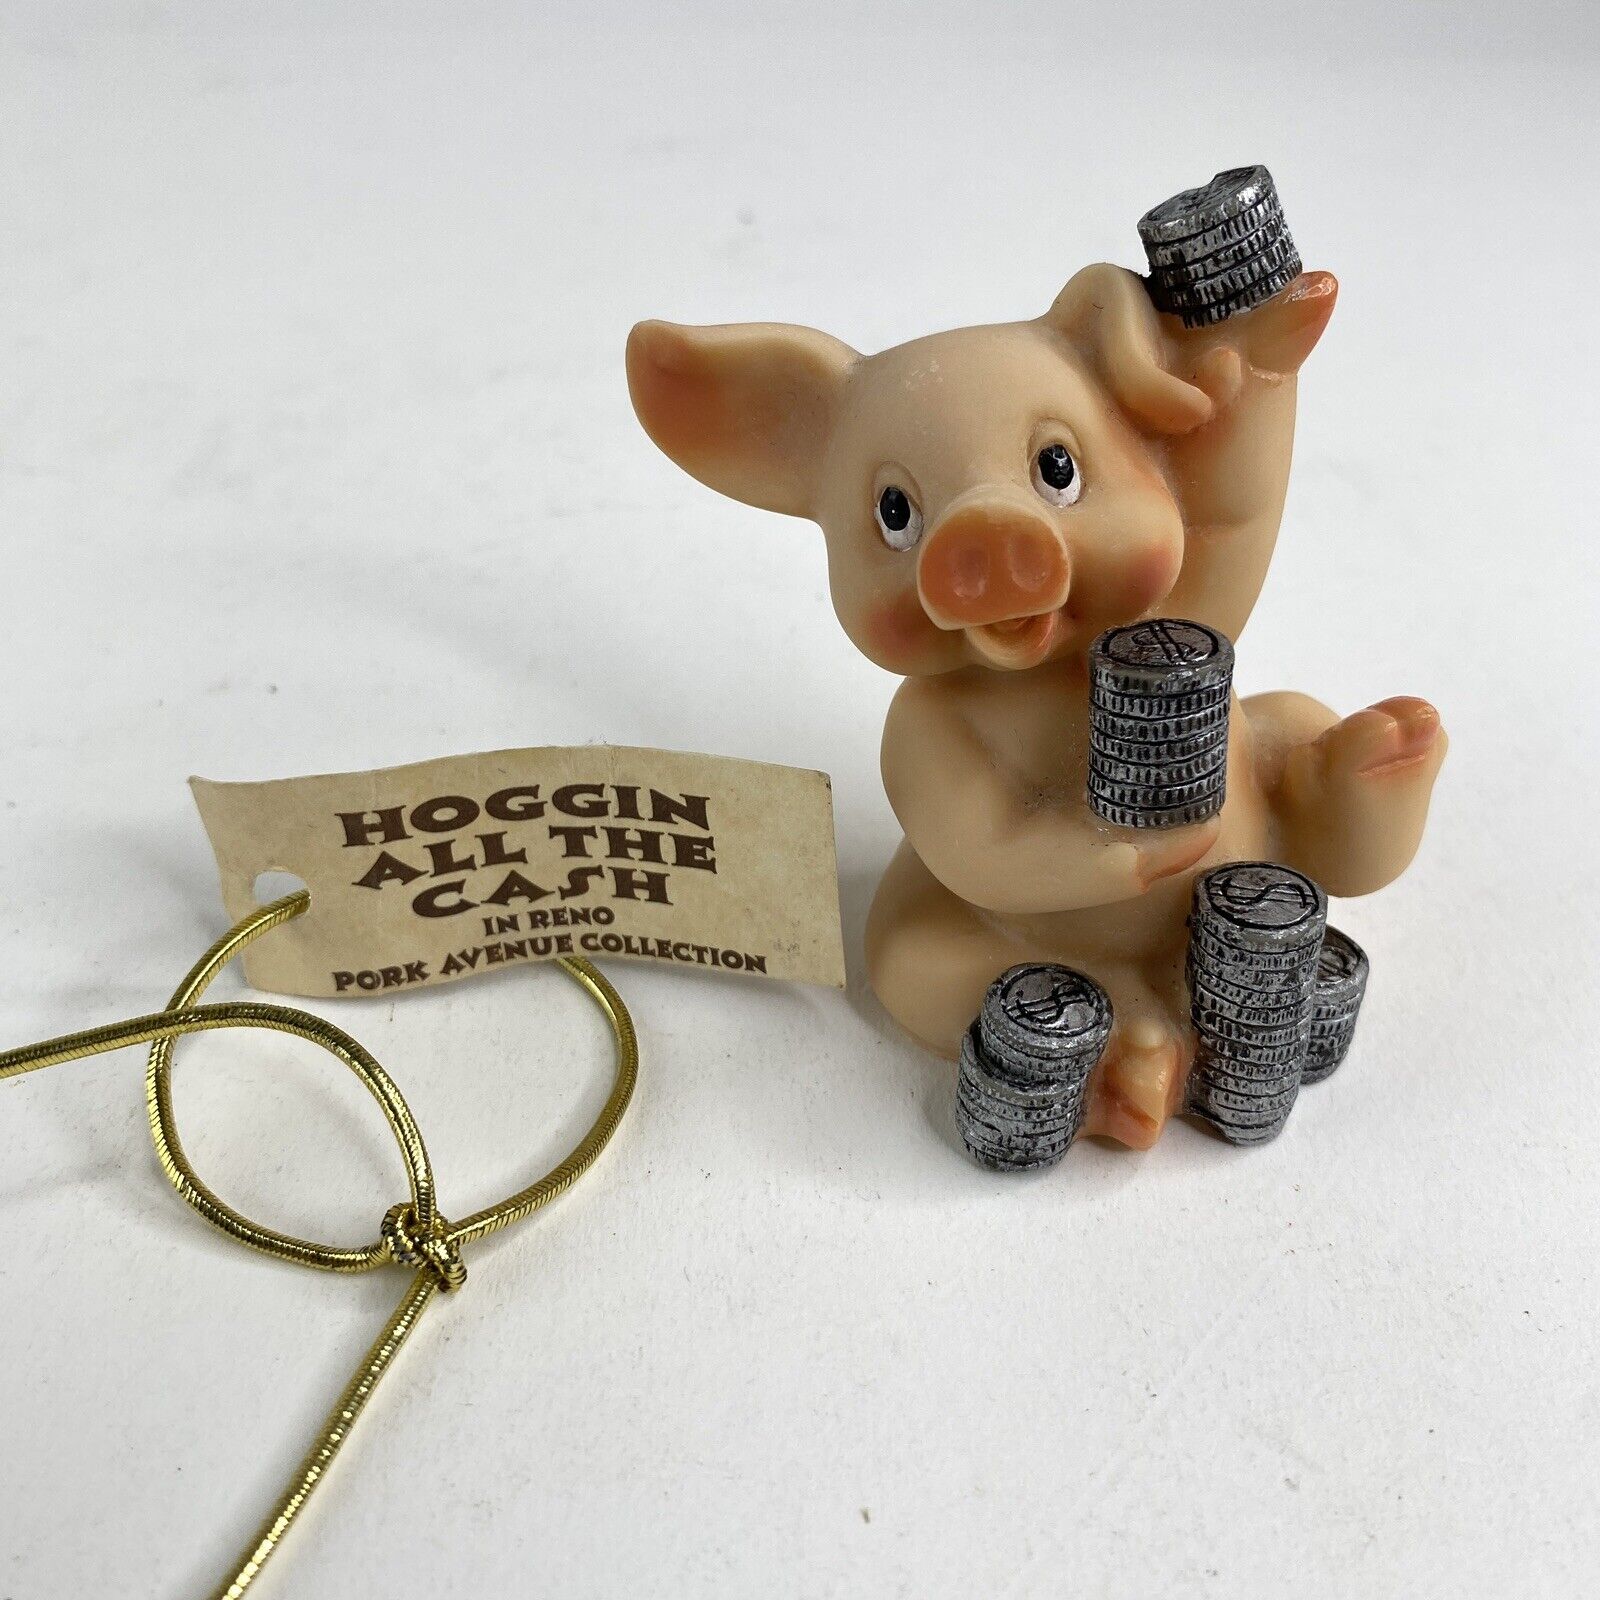 LITTLE PIG PLAYING WITH COINS Hoggin All The Cash PIGLETS FIGURINES